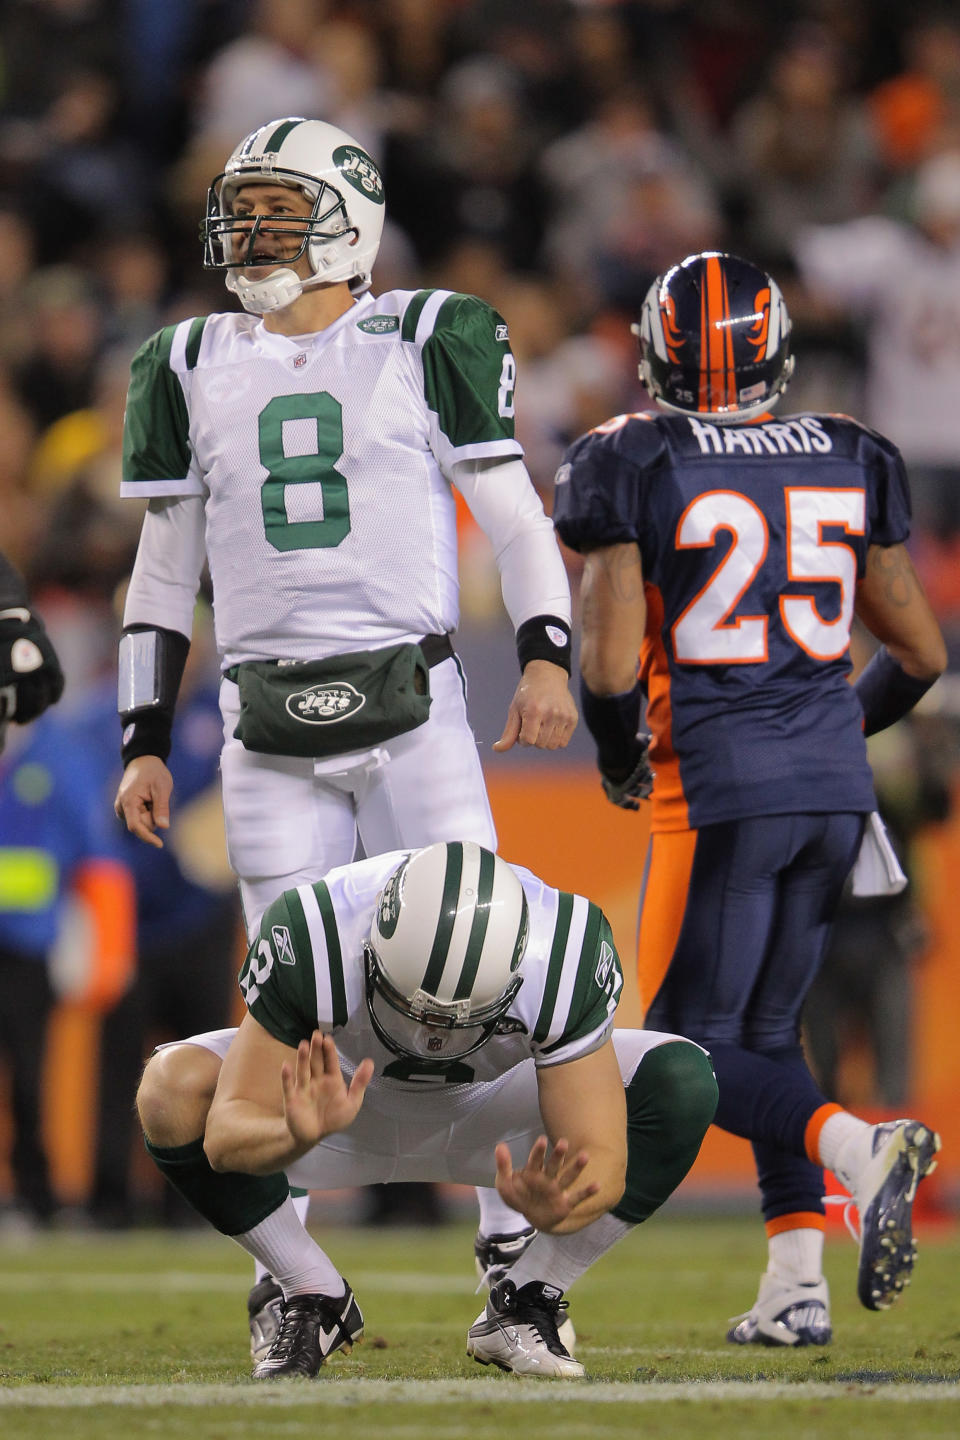 DENVER, CO - NOVEMBER 17: Nick Folk #2 and Mark Brunell #8 of the New York Jets react after Folk missed a 61-yard field goal attempt in the second quarter against the Denver Broncos at Invesco Field at Mile High on November 17, 2011 in Denver, Colorado. (Photo by Doug Pensinger/Getty Images)